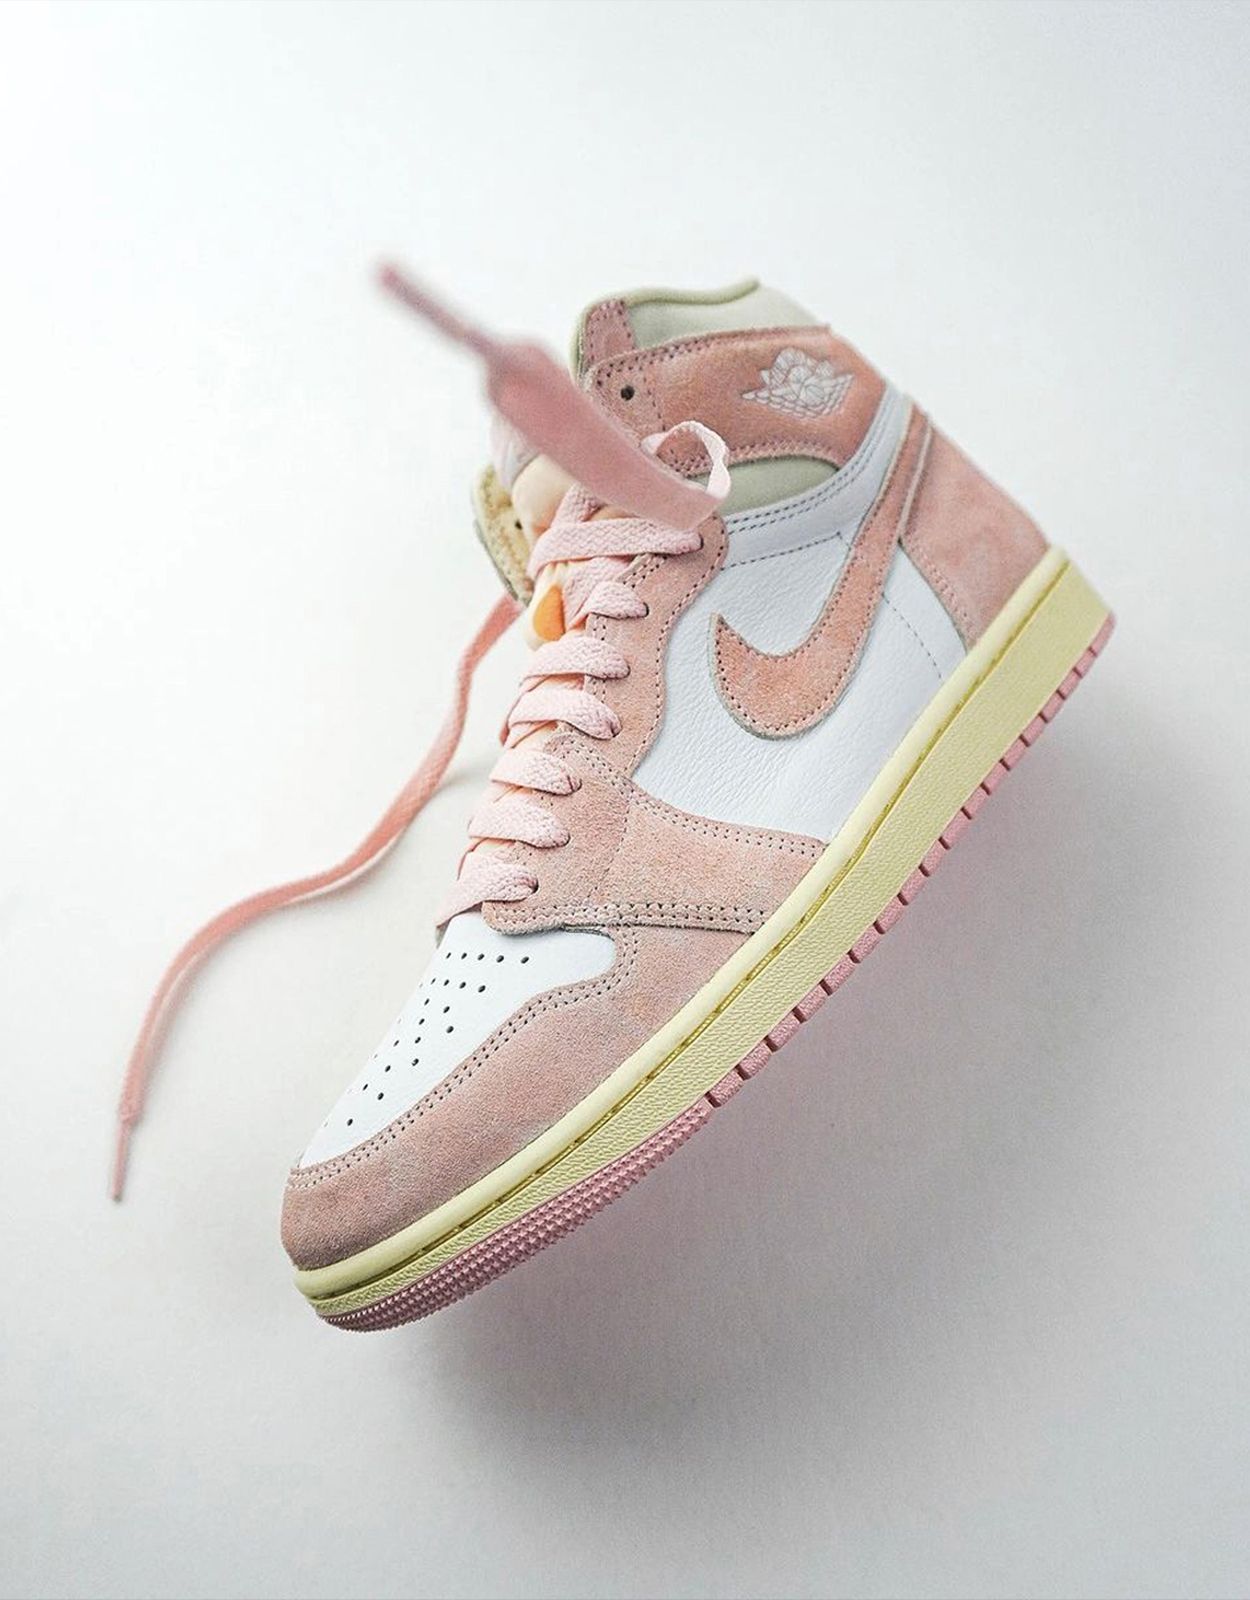 Where to Buy the Air Jordan 1 High OG “Washed Pink” | House